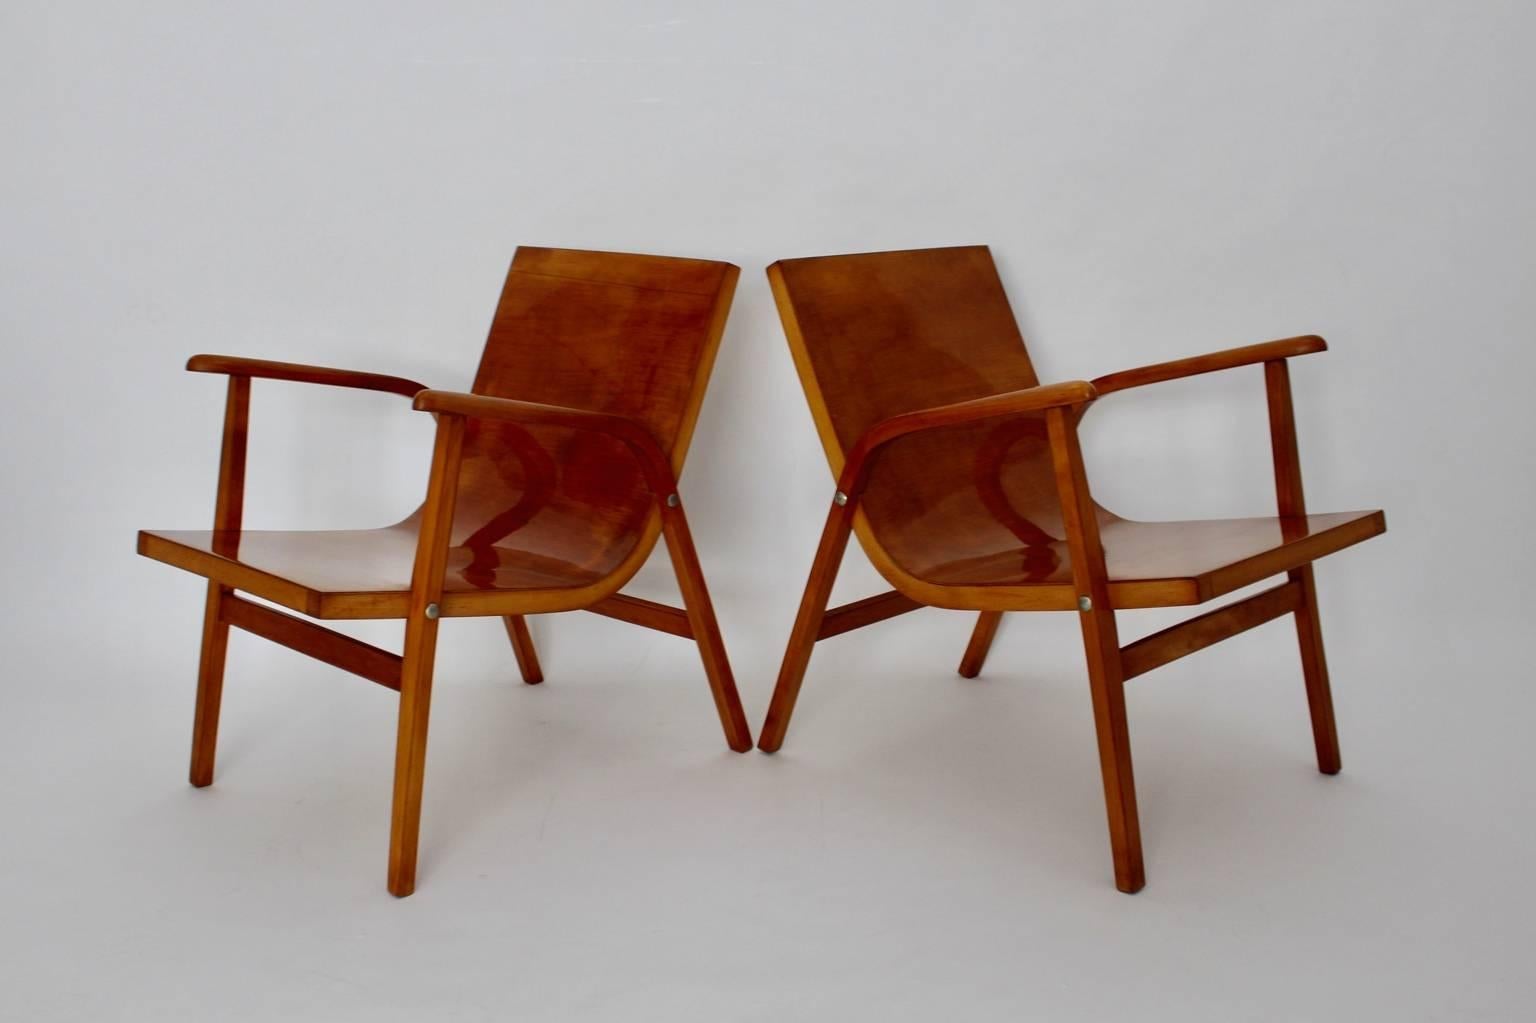 Mid Century Modern vintage pair of lounge chairs from beech designed by Roland Rainer, Vienna 1952 for the Cafe Ritter in Vienna, and manufactured by Emil & Alfred Pollak, Vienna.

The simple and chic lounge chairs are made of solid bent beechwood